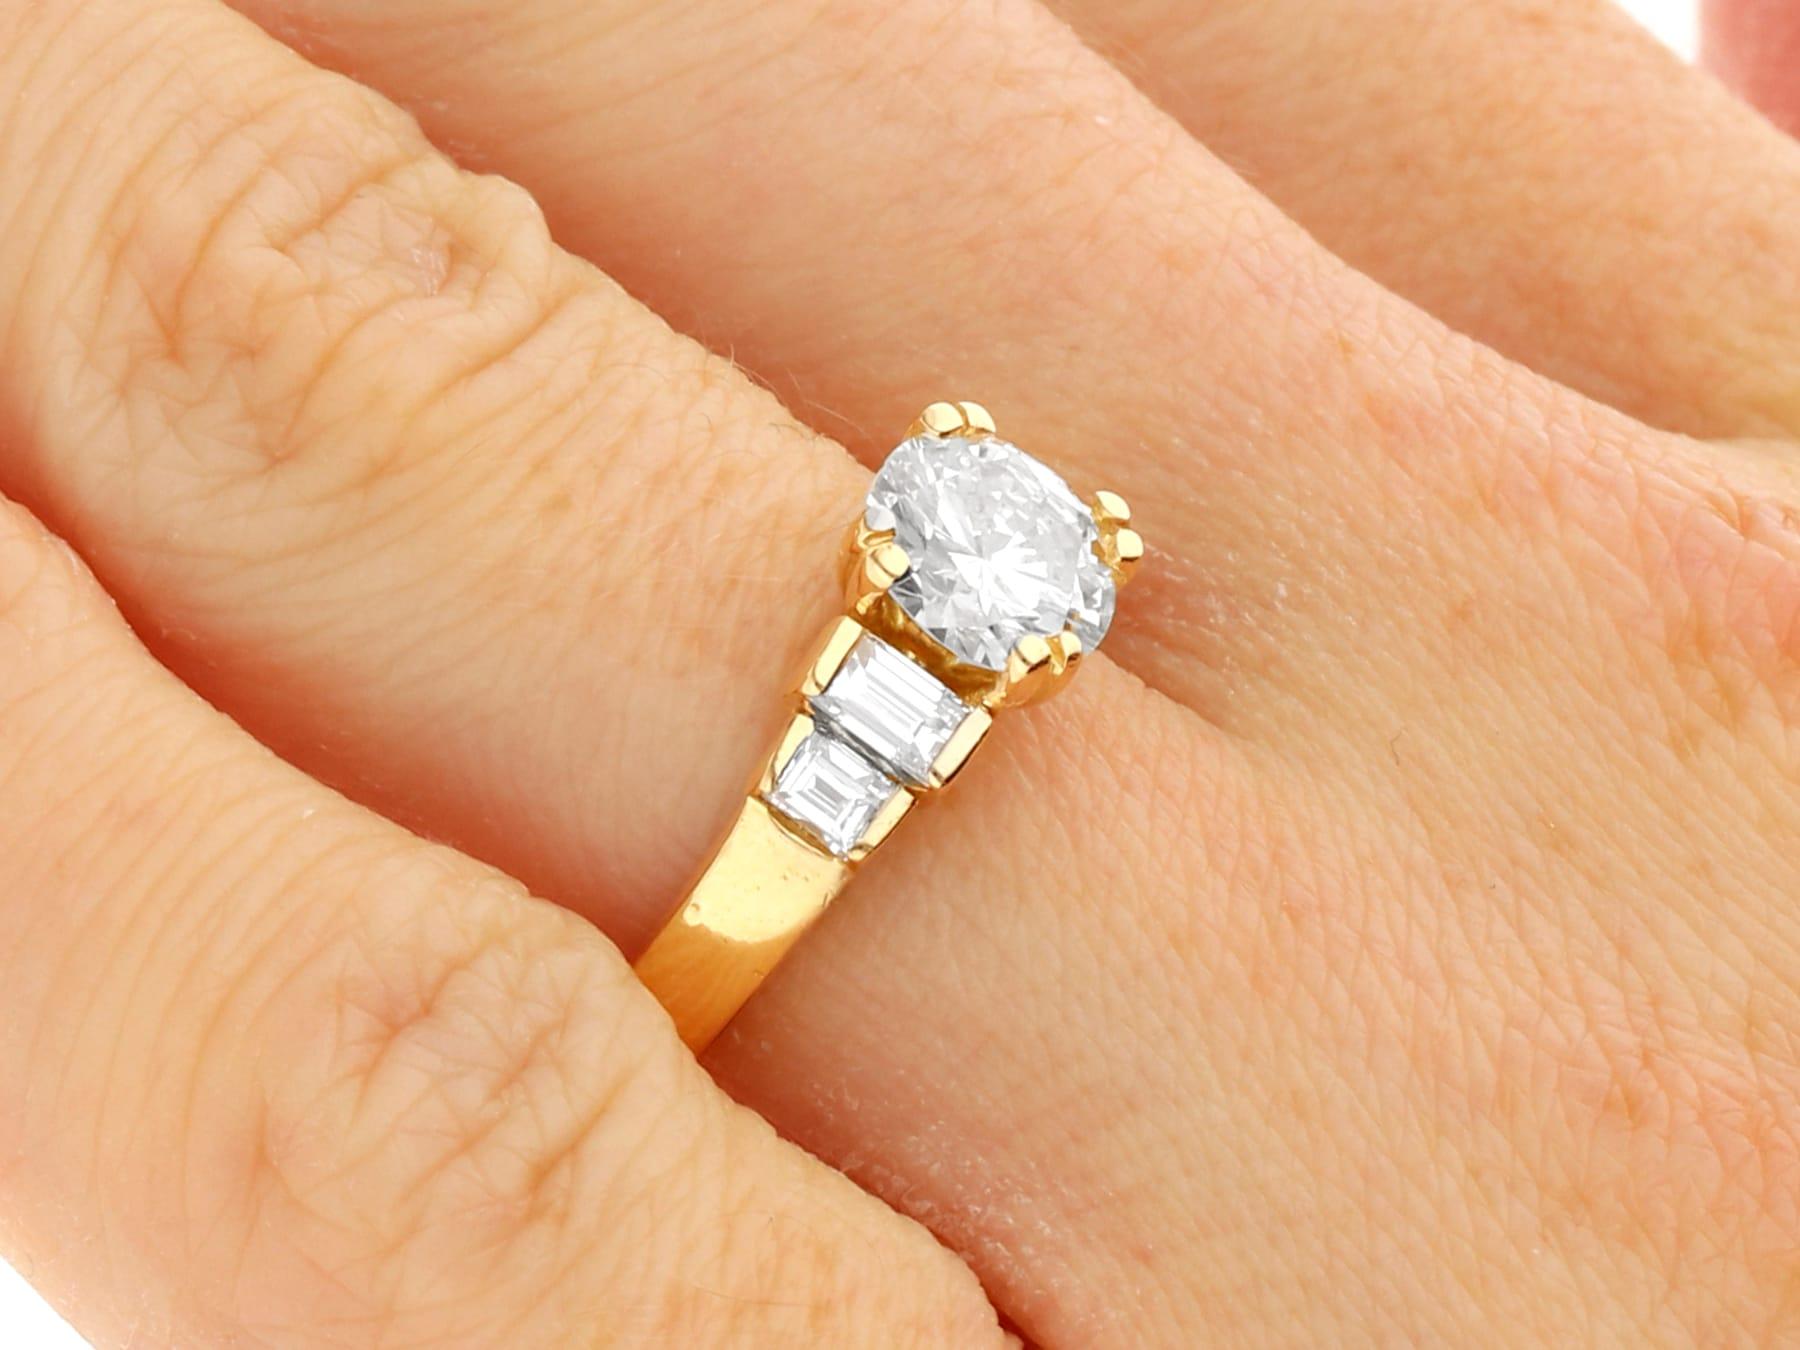 Vintage French 1.38 Carat Diamond and Yellow Gold Solitaire Ring For Sale 2